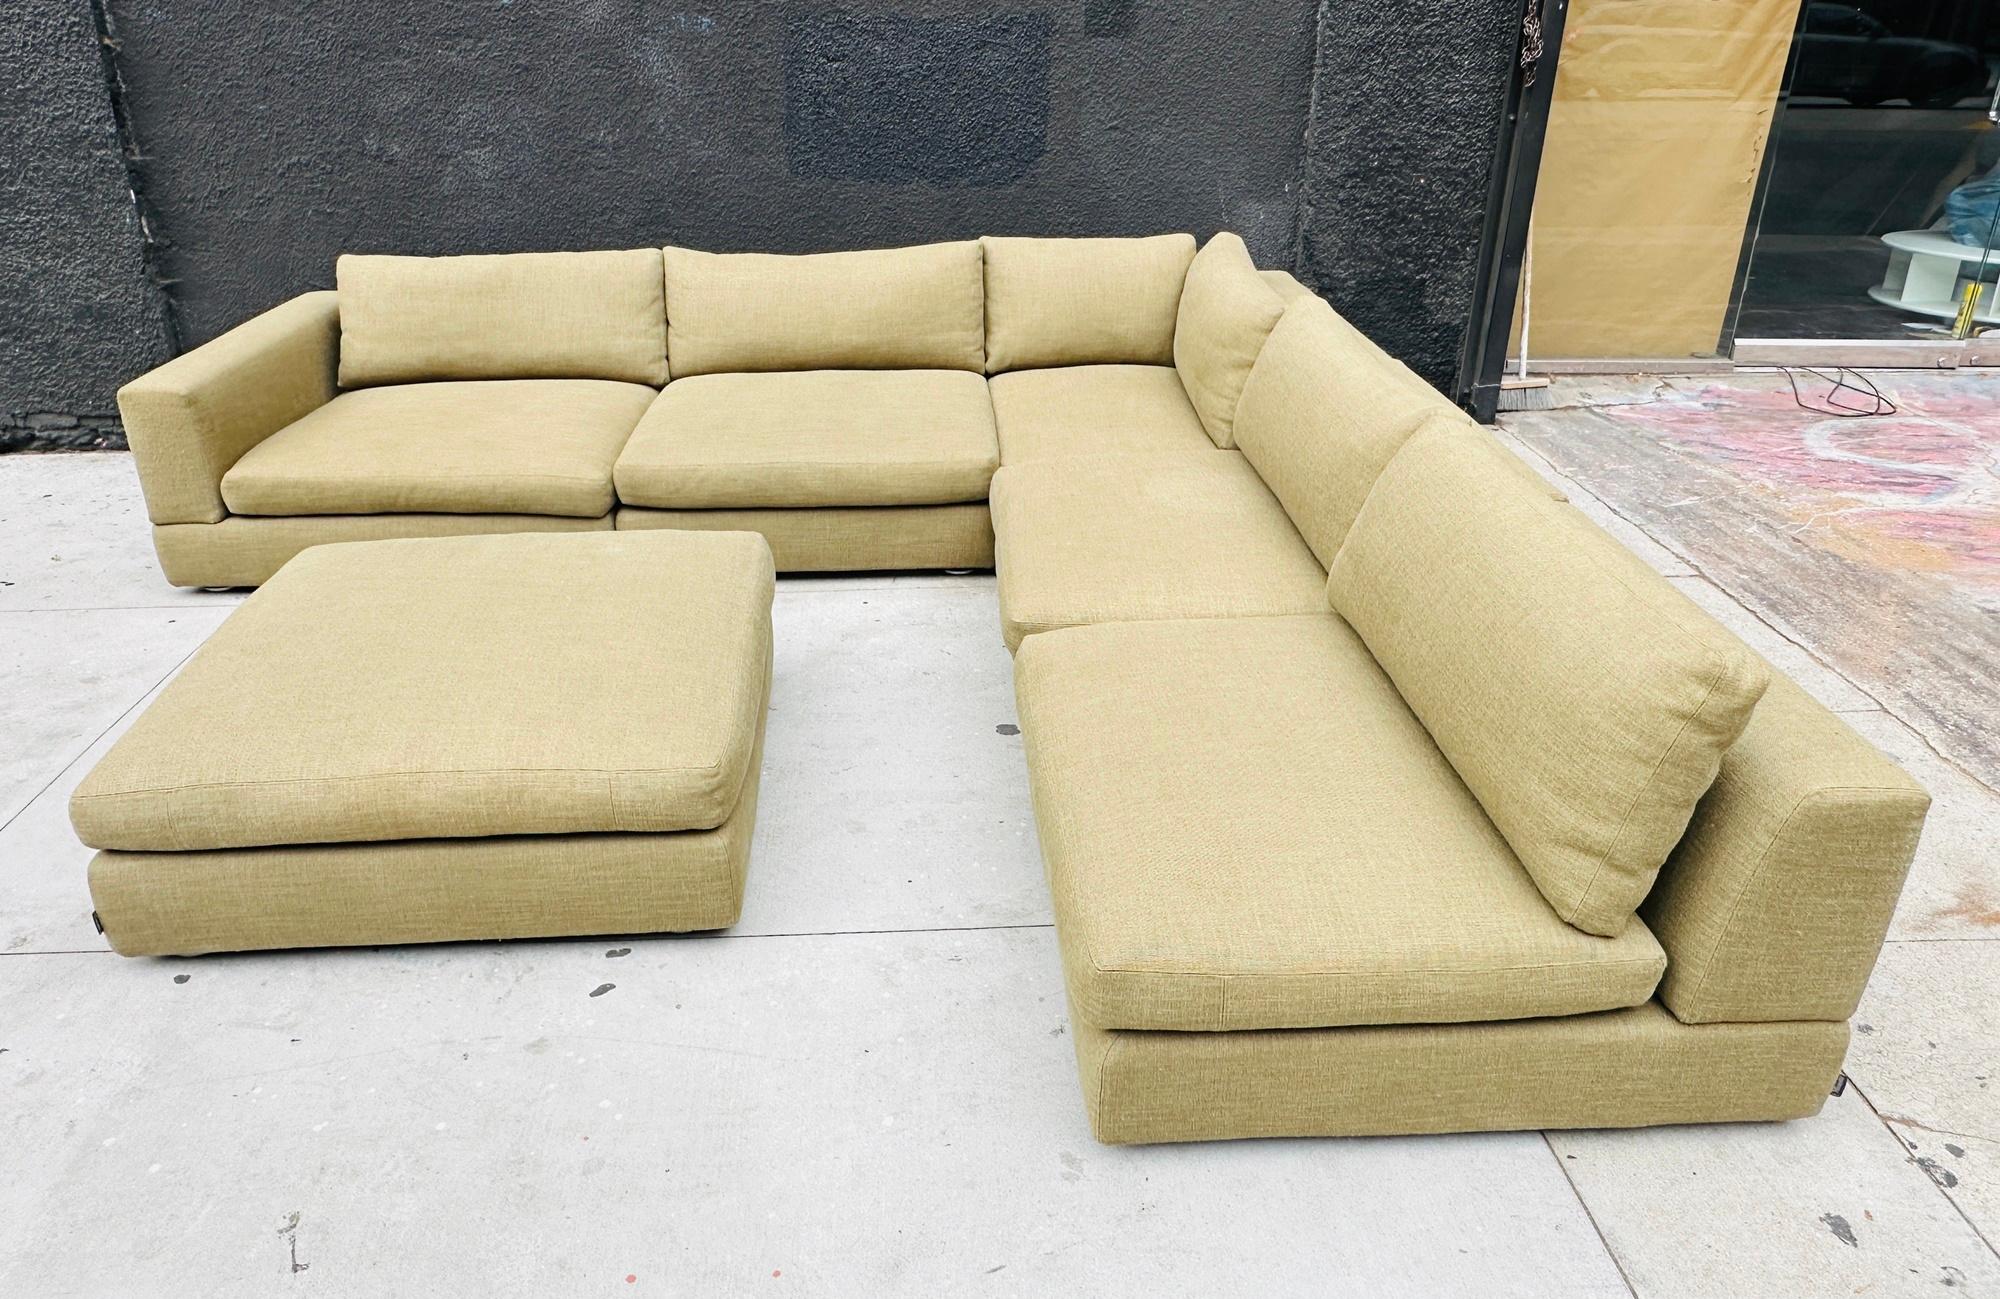 6 Piece Sectional Made in Italy by Rodolfo Dordoni for Minotti, Italy 2006 For Sale 10